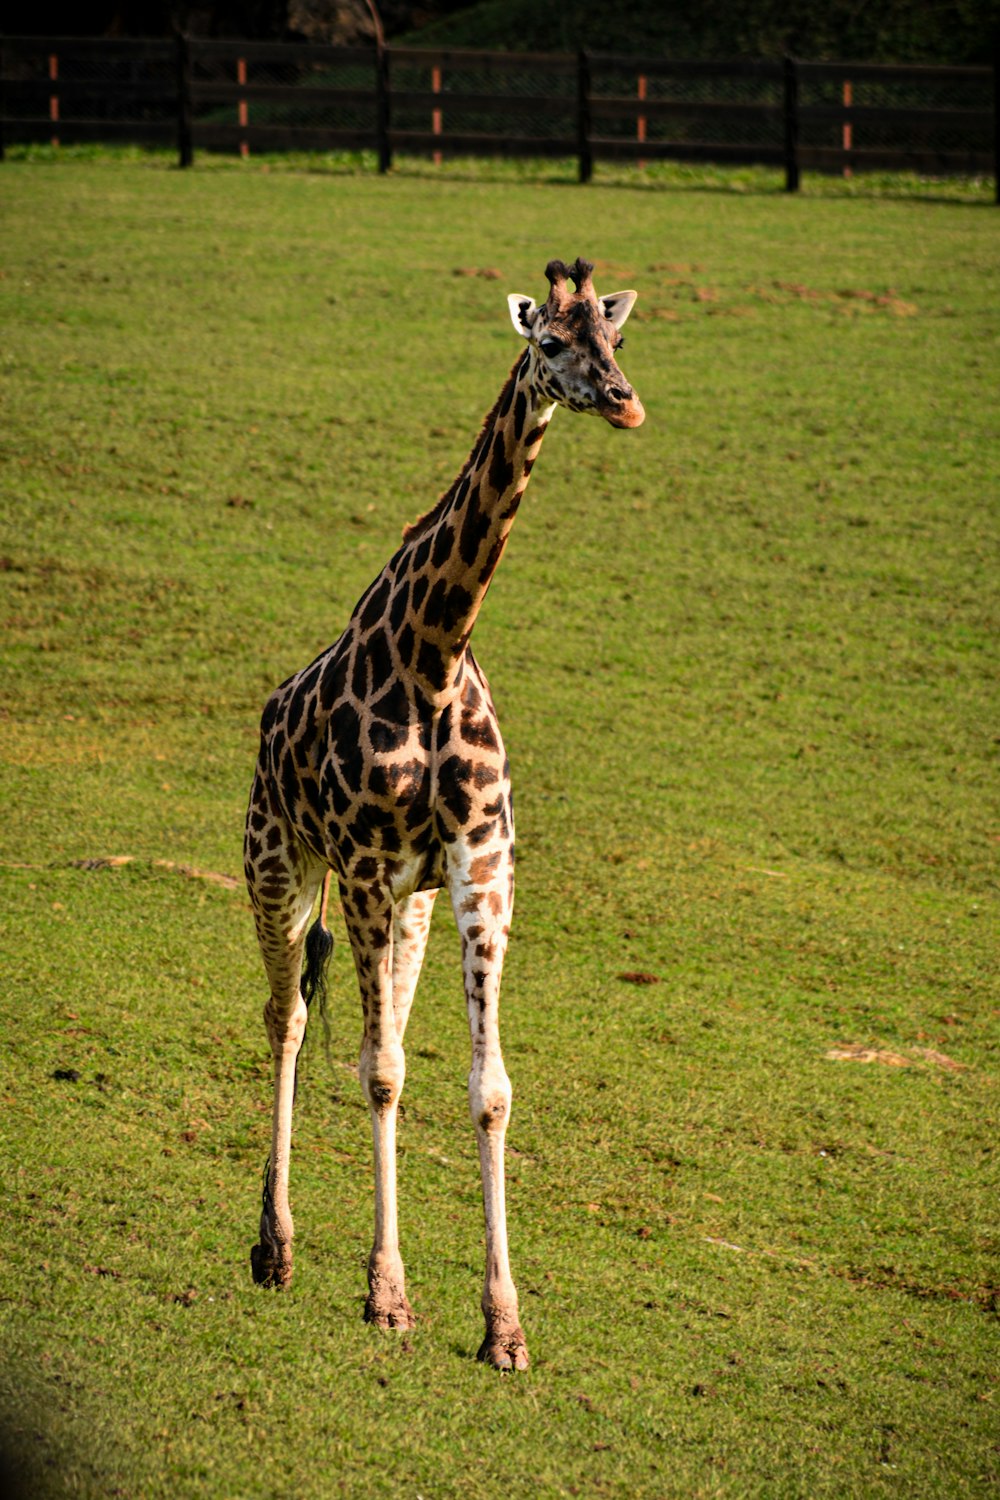 a giraffe standing in the middle of a grassy field